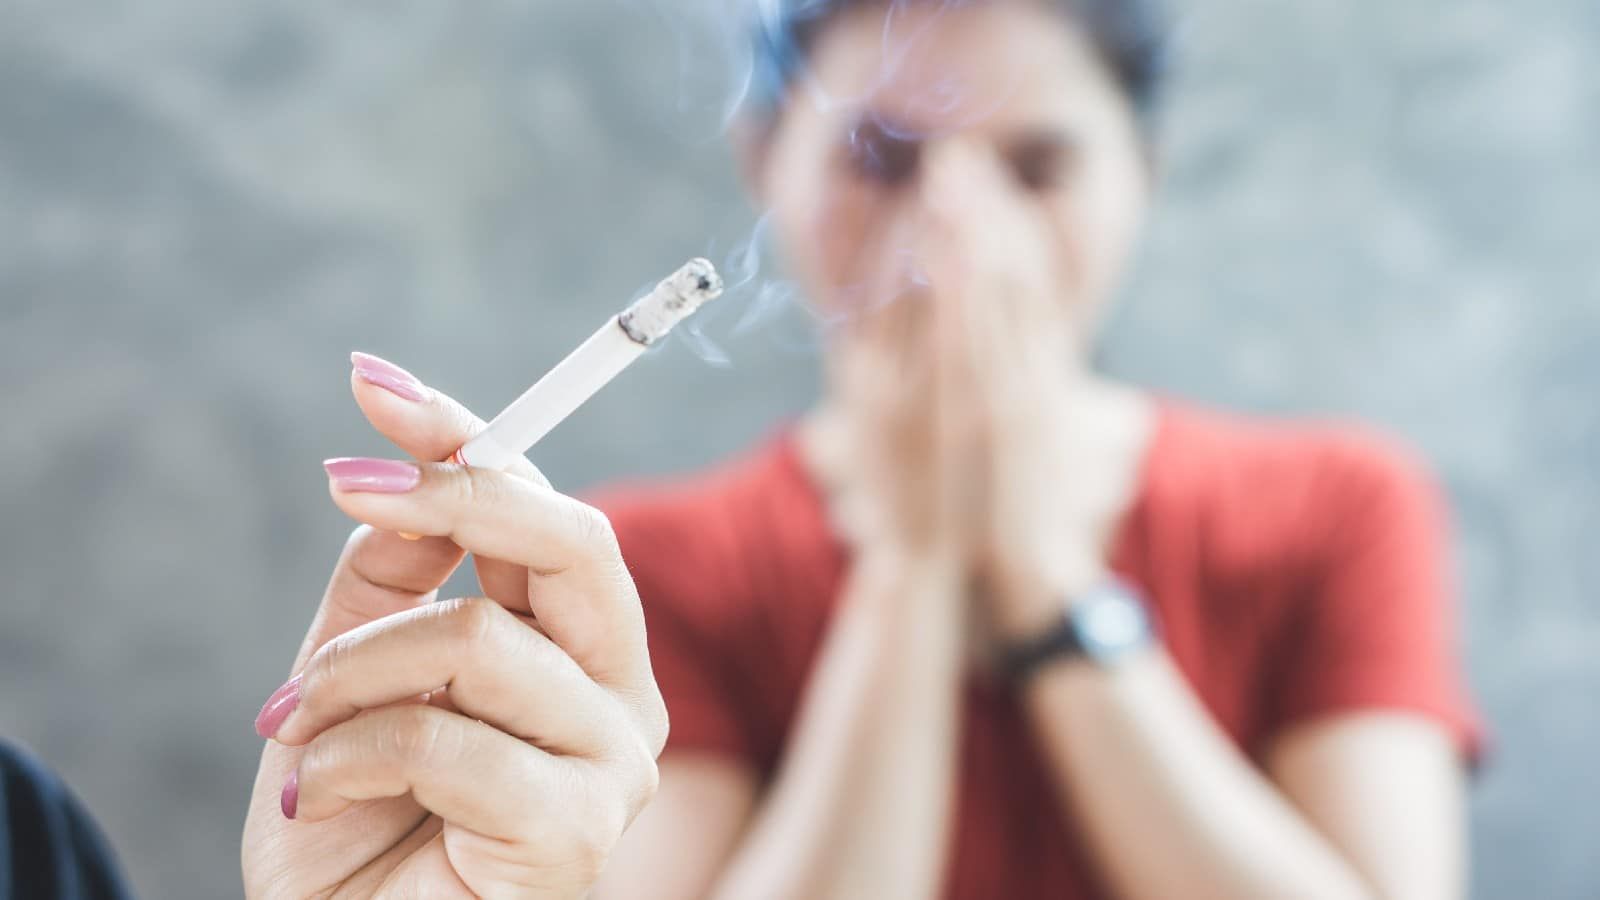 Does your risk of lung cancer increase due to secondhand smoke